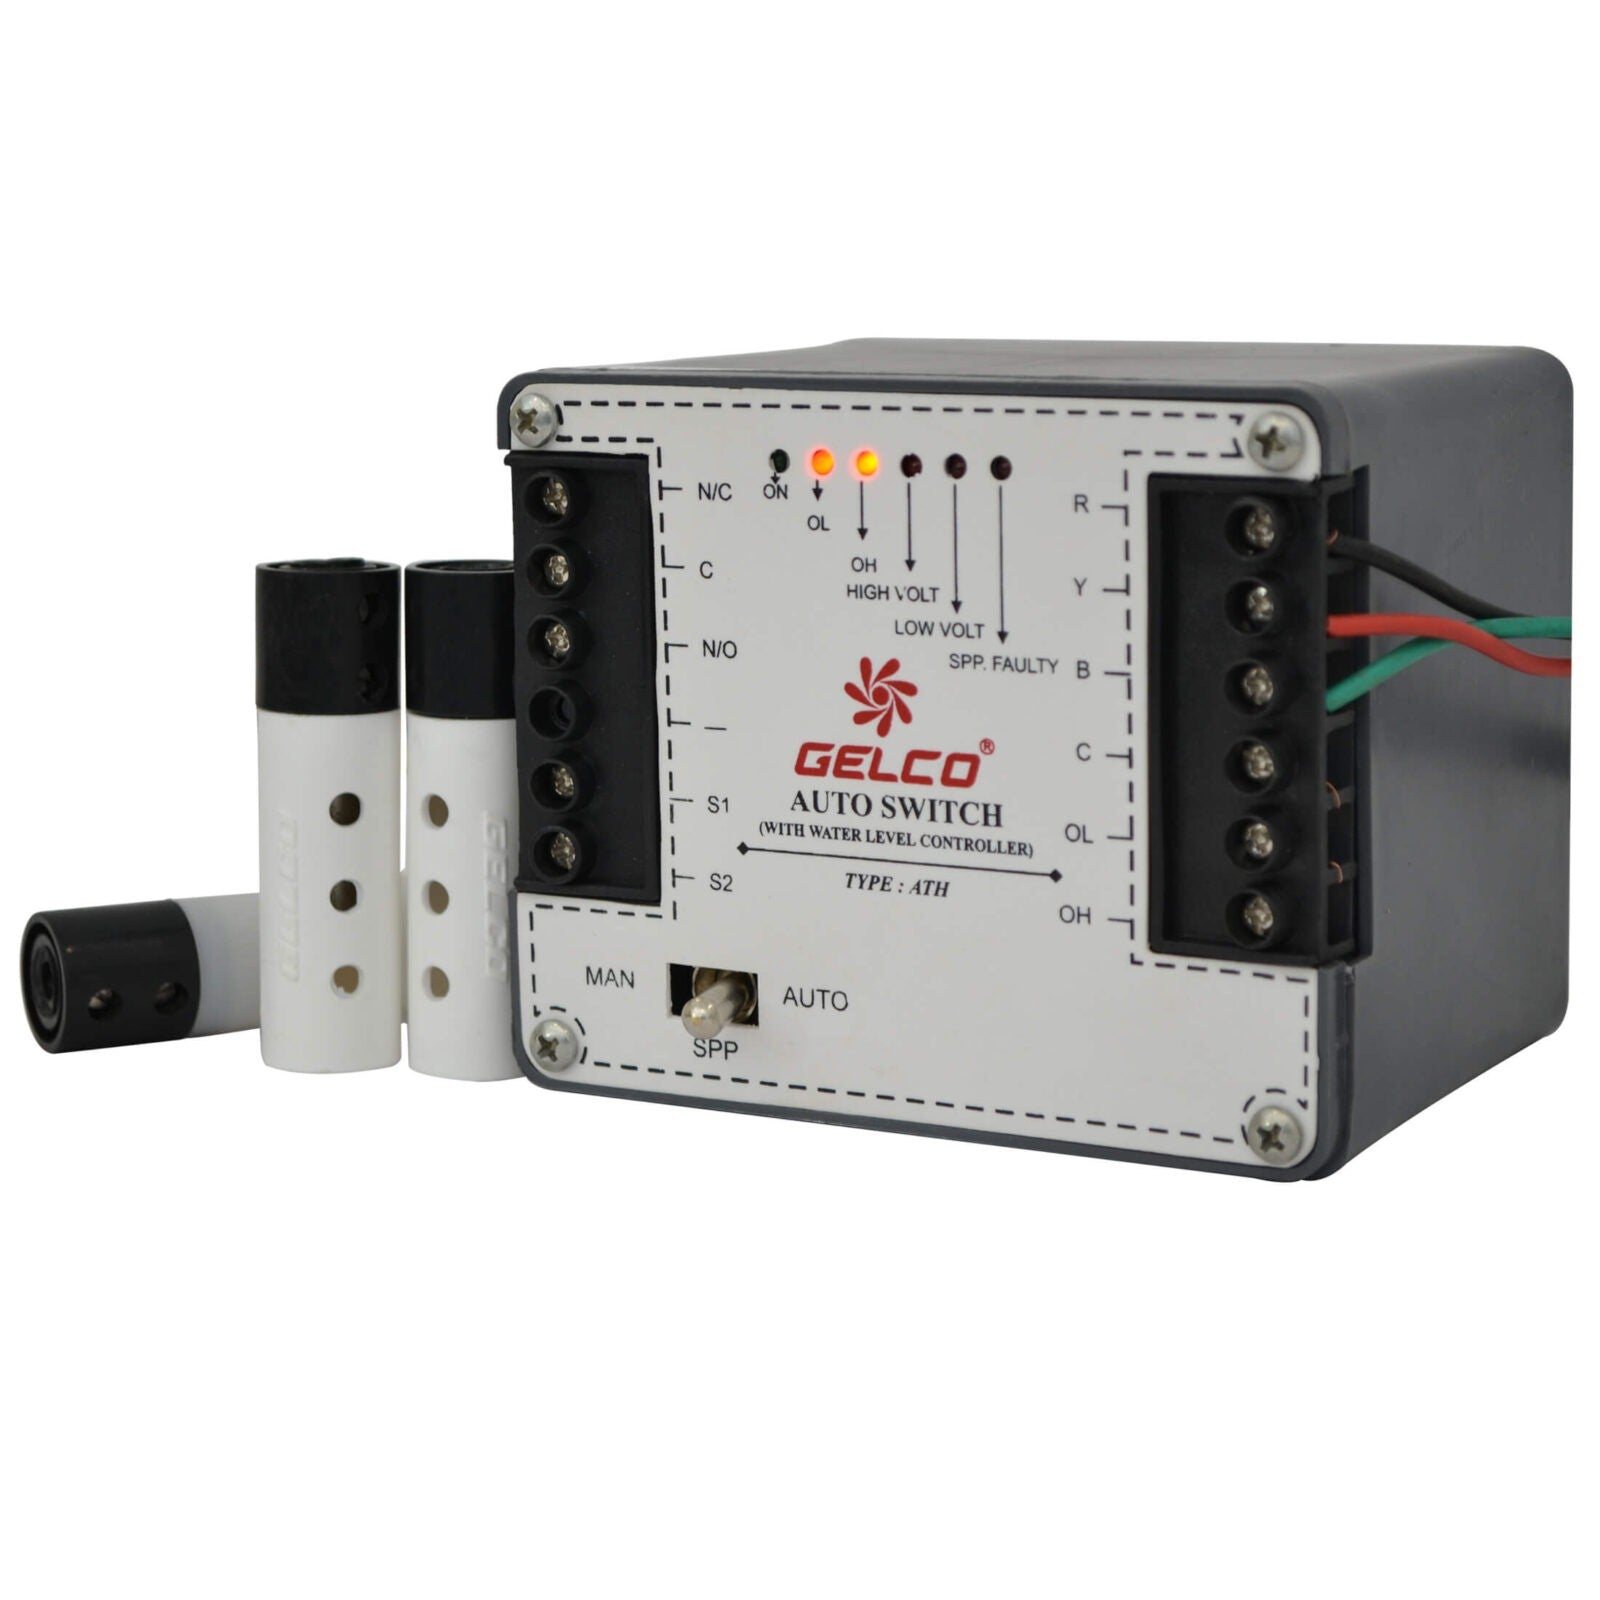 Auto Switch with Water Level Controller (ATH), Water Level Controller - Gelco Electronics Pvt. Ltd.